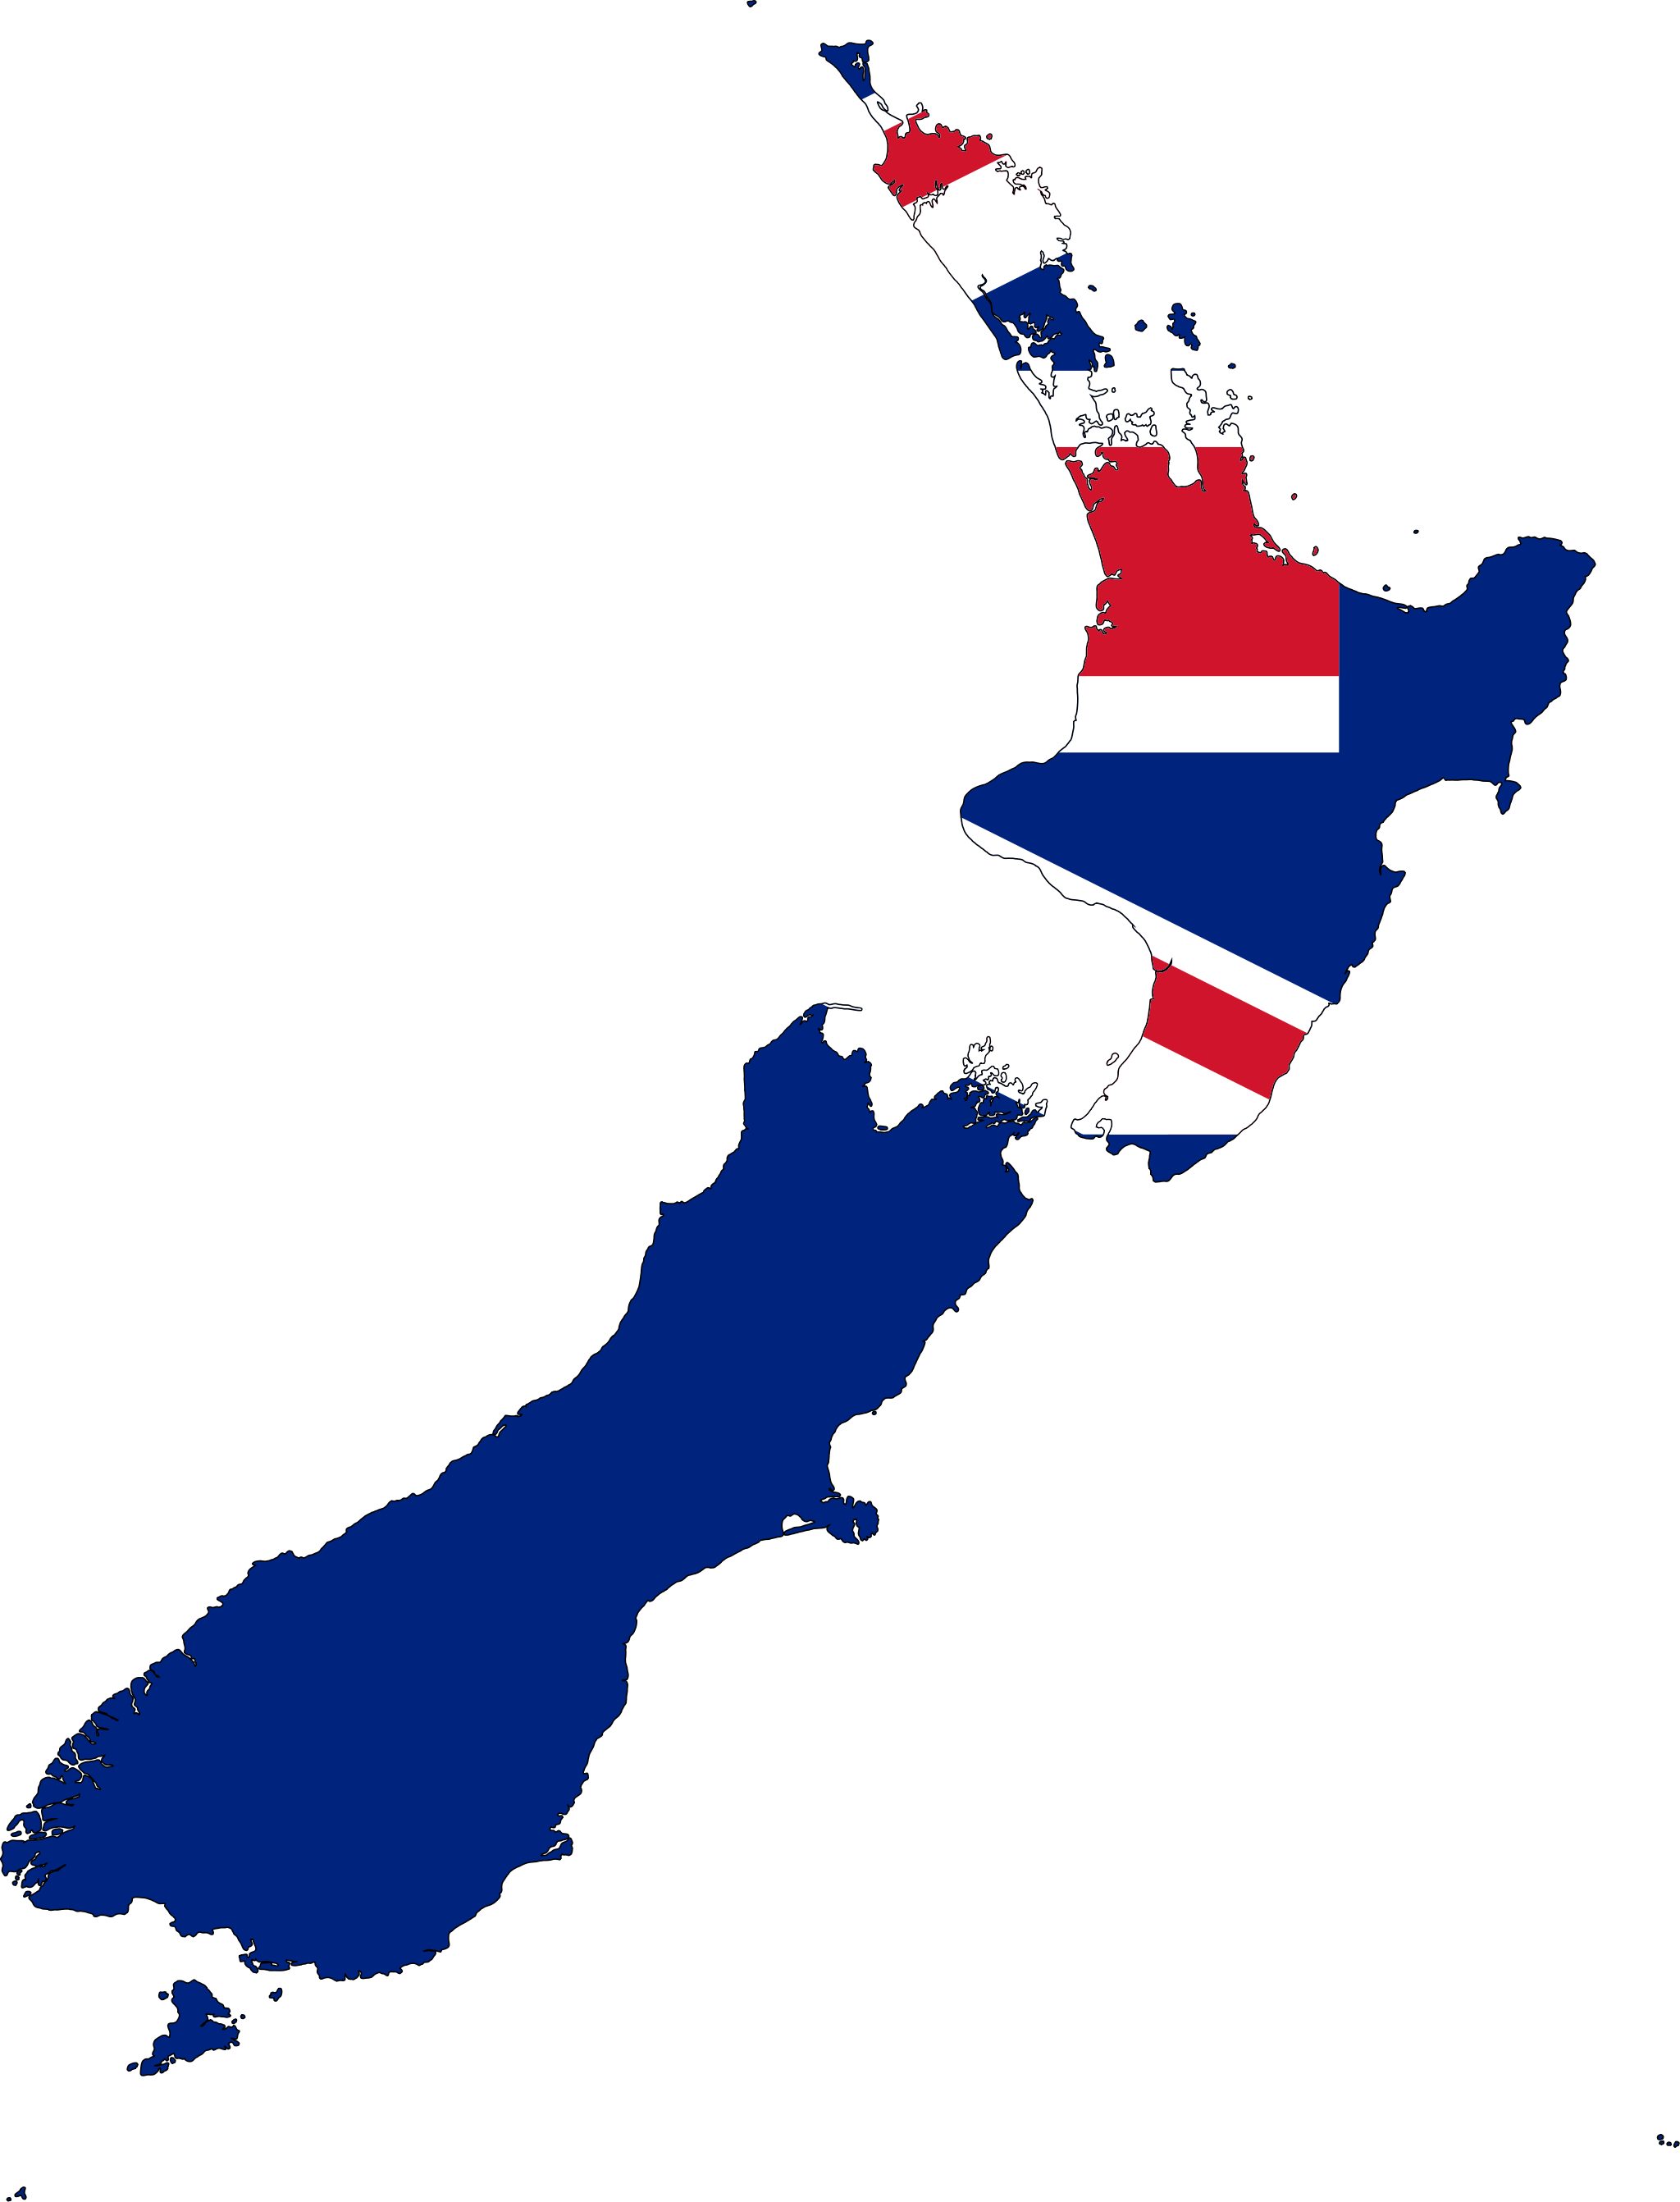 New Zealand PNG - 40293